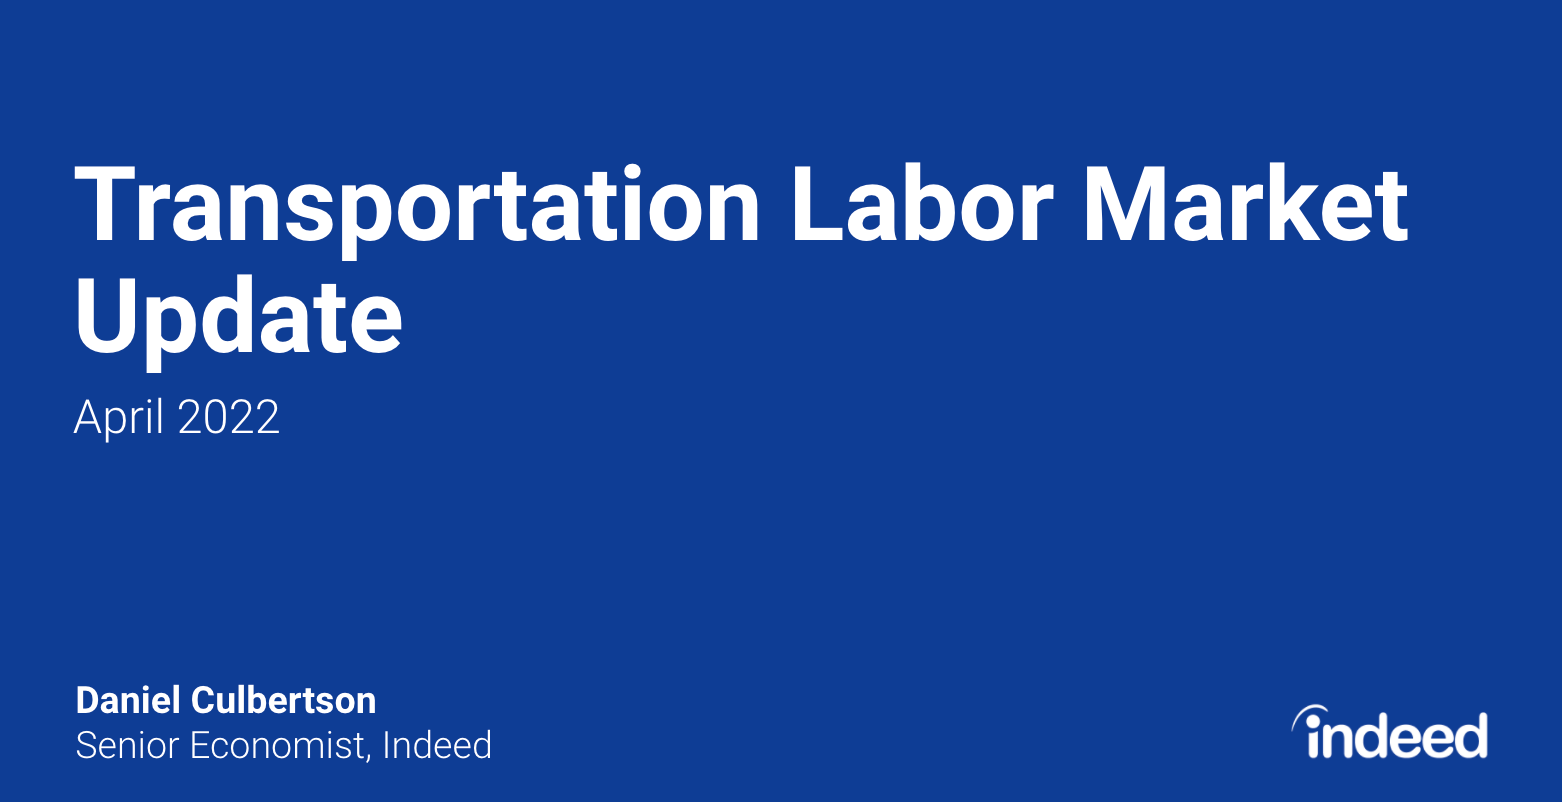 Header photo with the title "Transportation Labor Market Update"